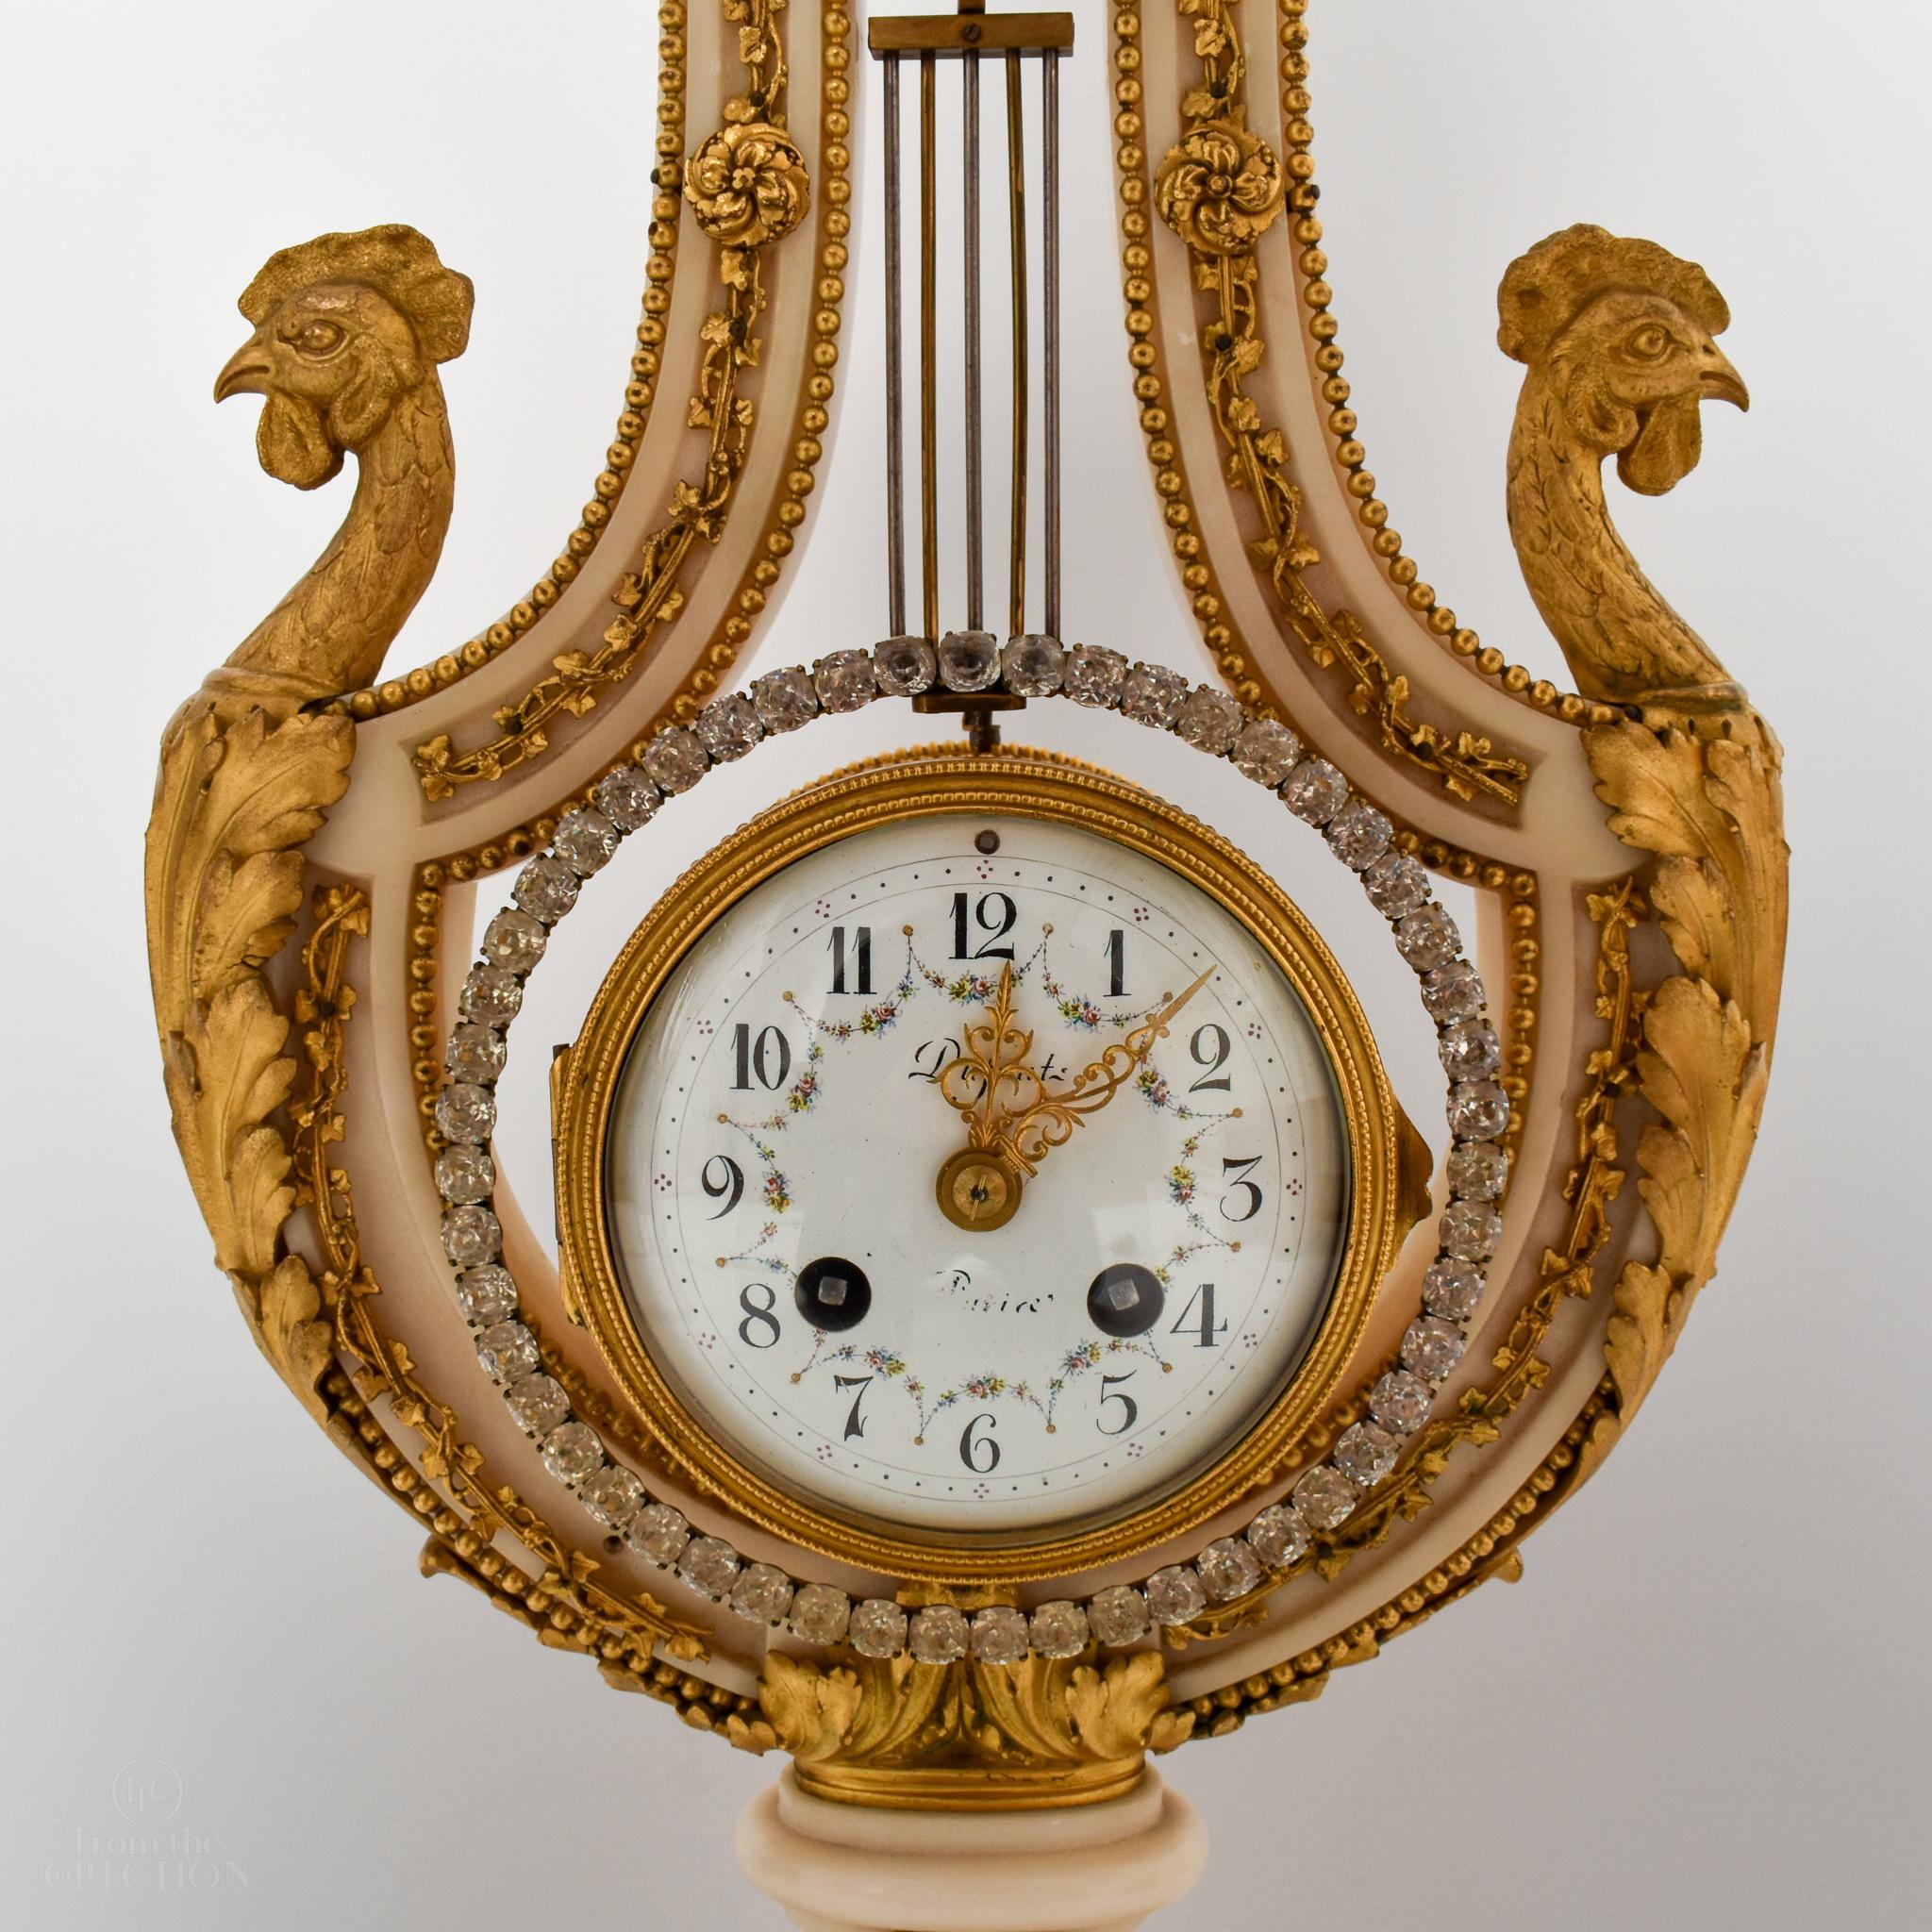 19th Century clock in the shape of a Lyre with a sun at the top. It is a beautiful clock that will add class and elegance to any mantle piece. The sides of the clock have a pair of cockerels.